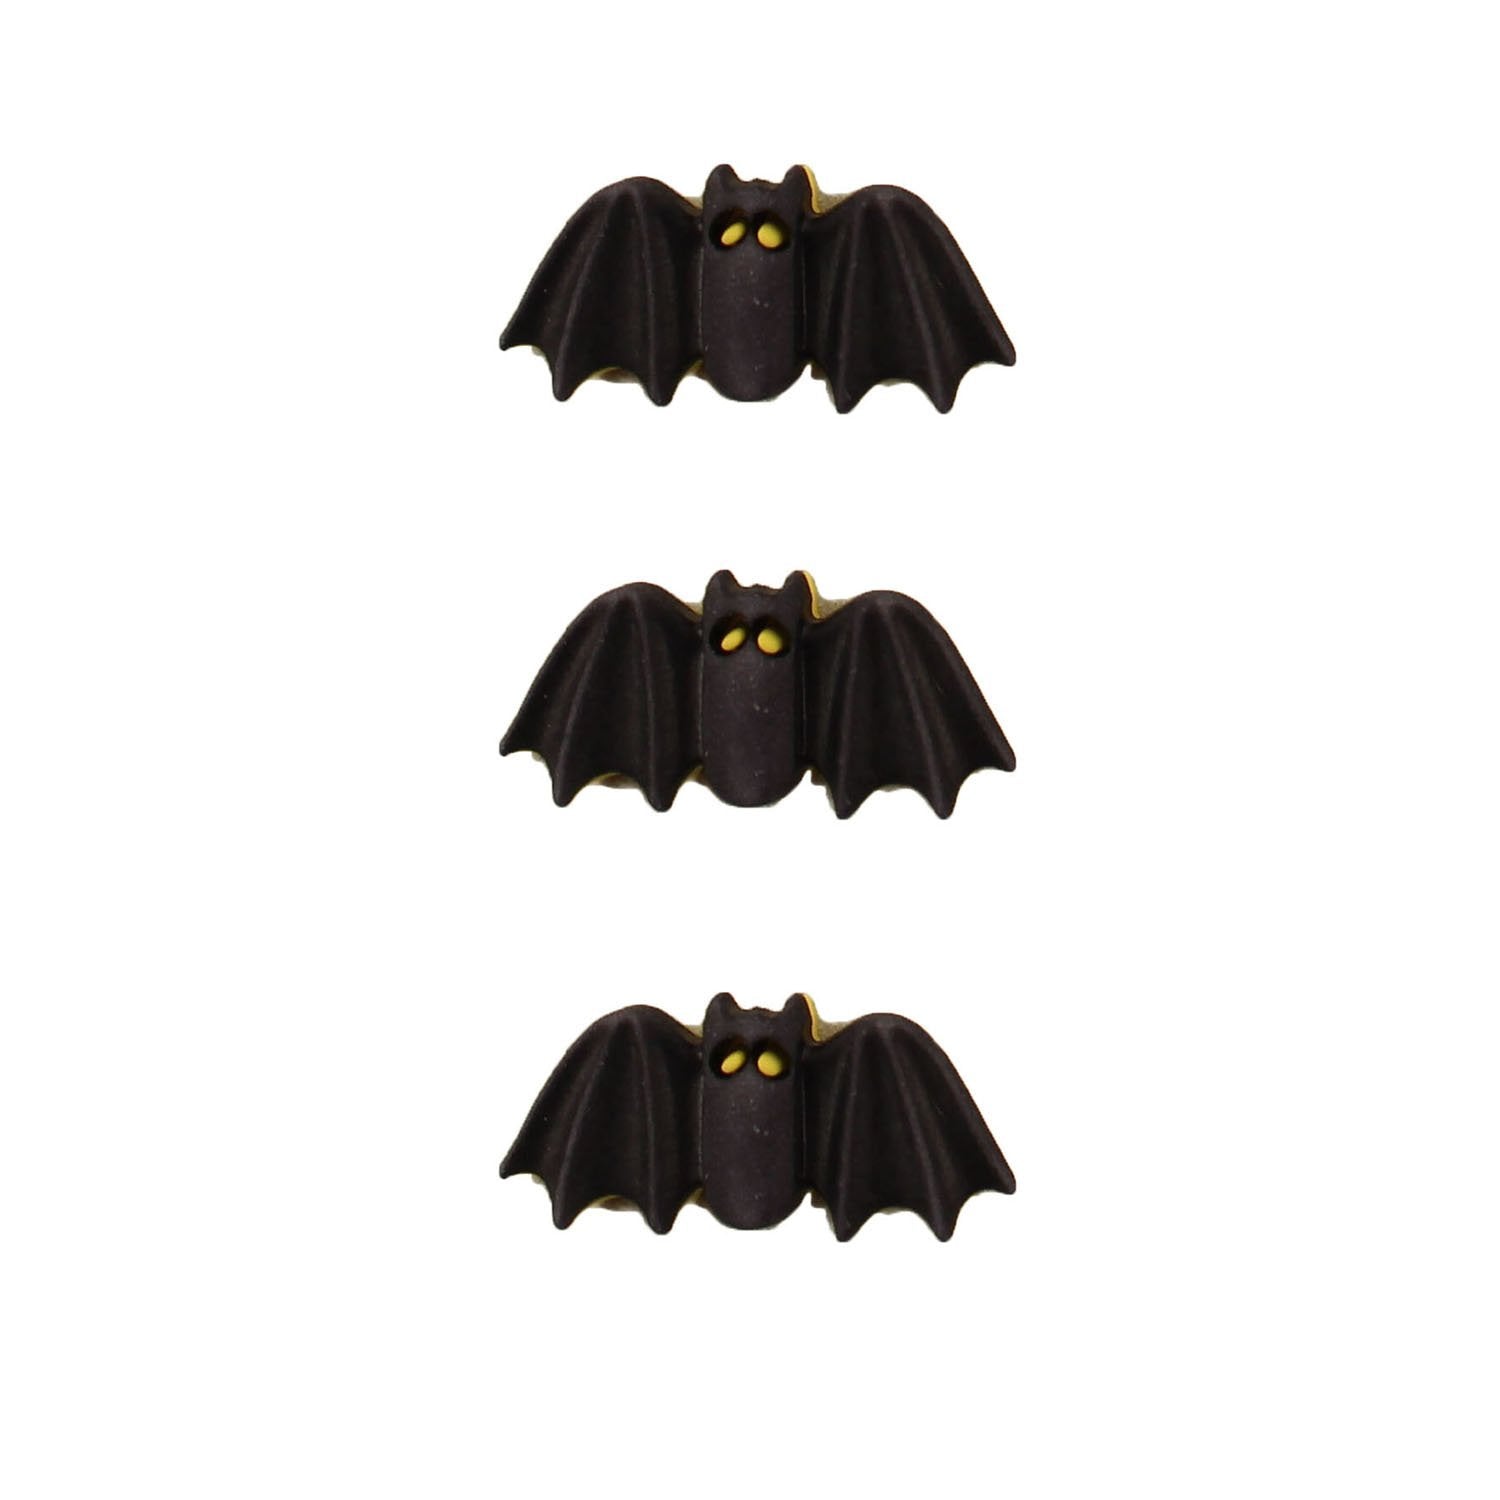 Bats - HH121 - Buttons Galore and More